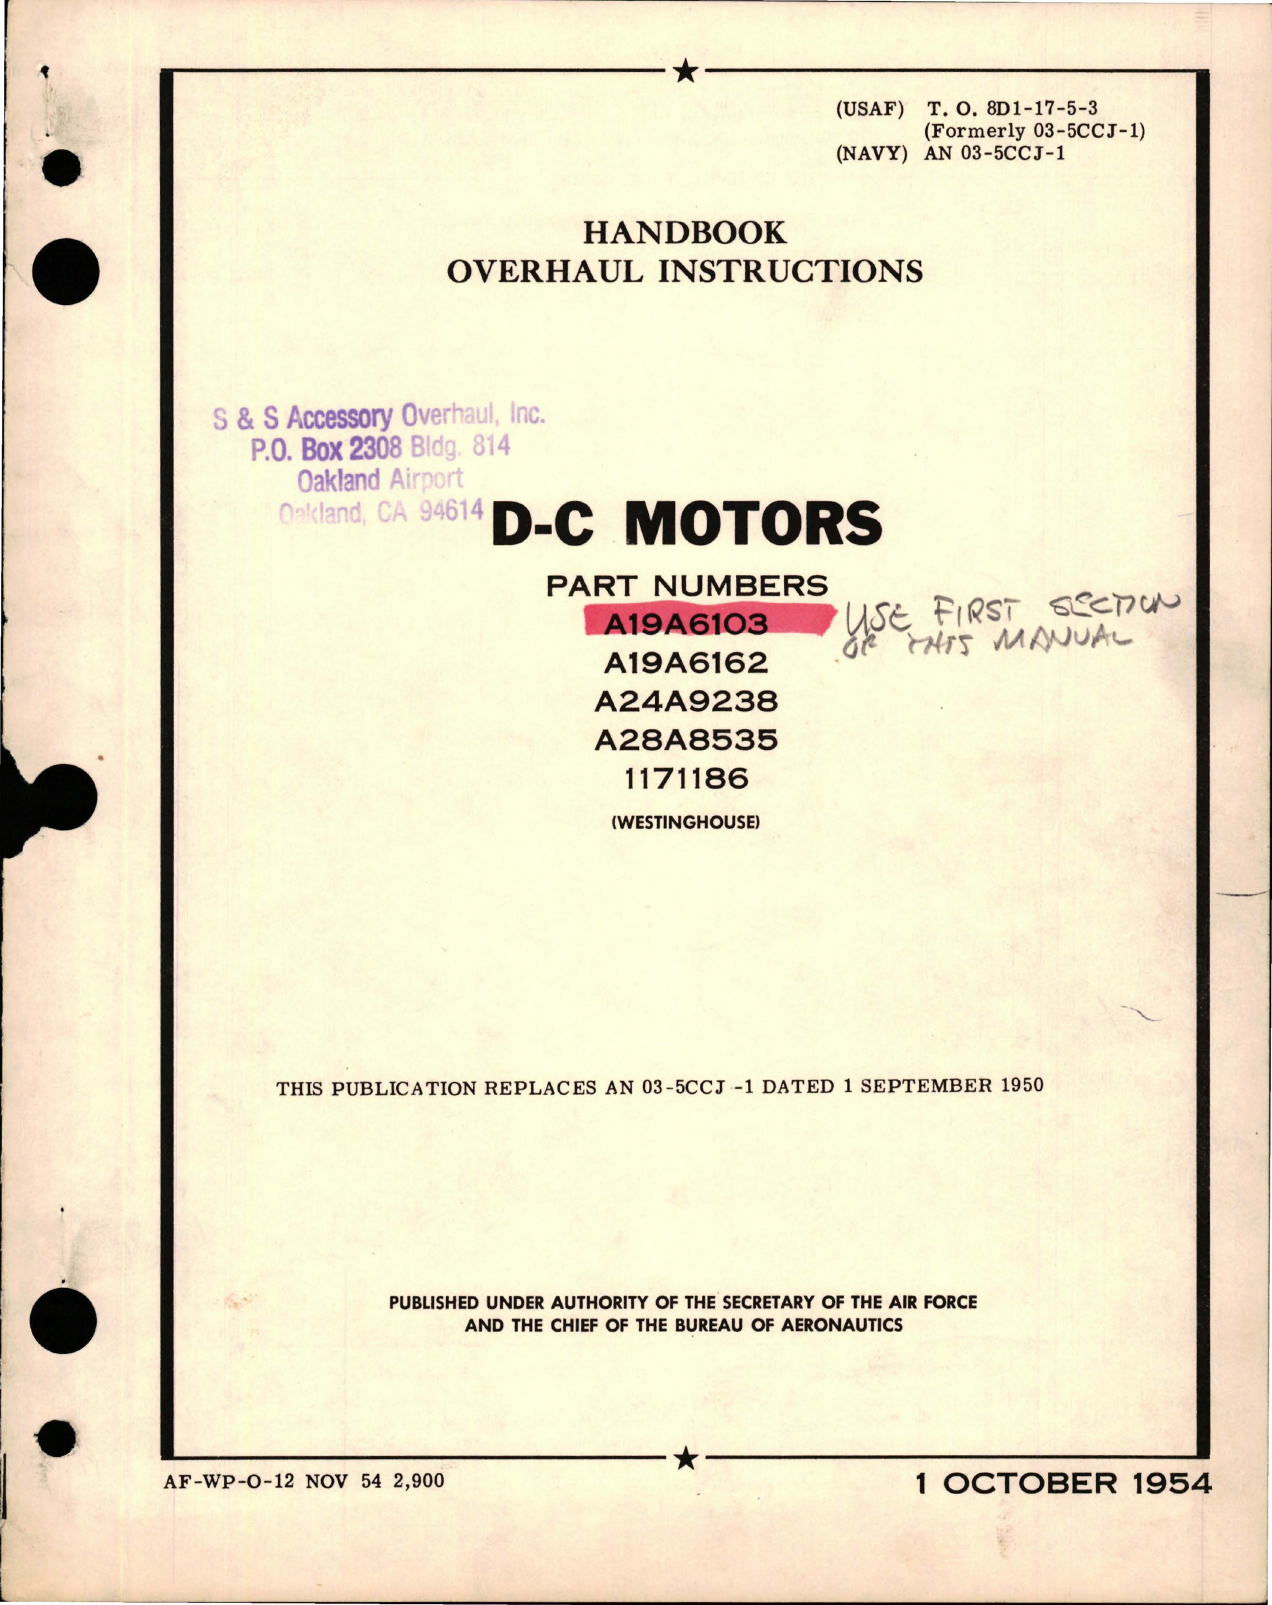 Sample page 1 from AirCorps Library document: Overhaul Instructions for D-C Motors - Parts A19A6103, A19A6162, A24A9238, A28A8535, 1171186 